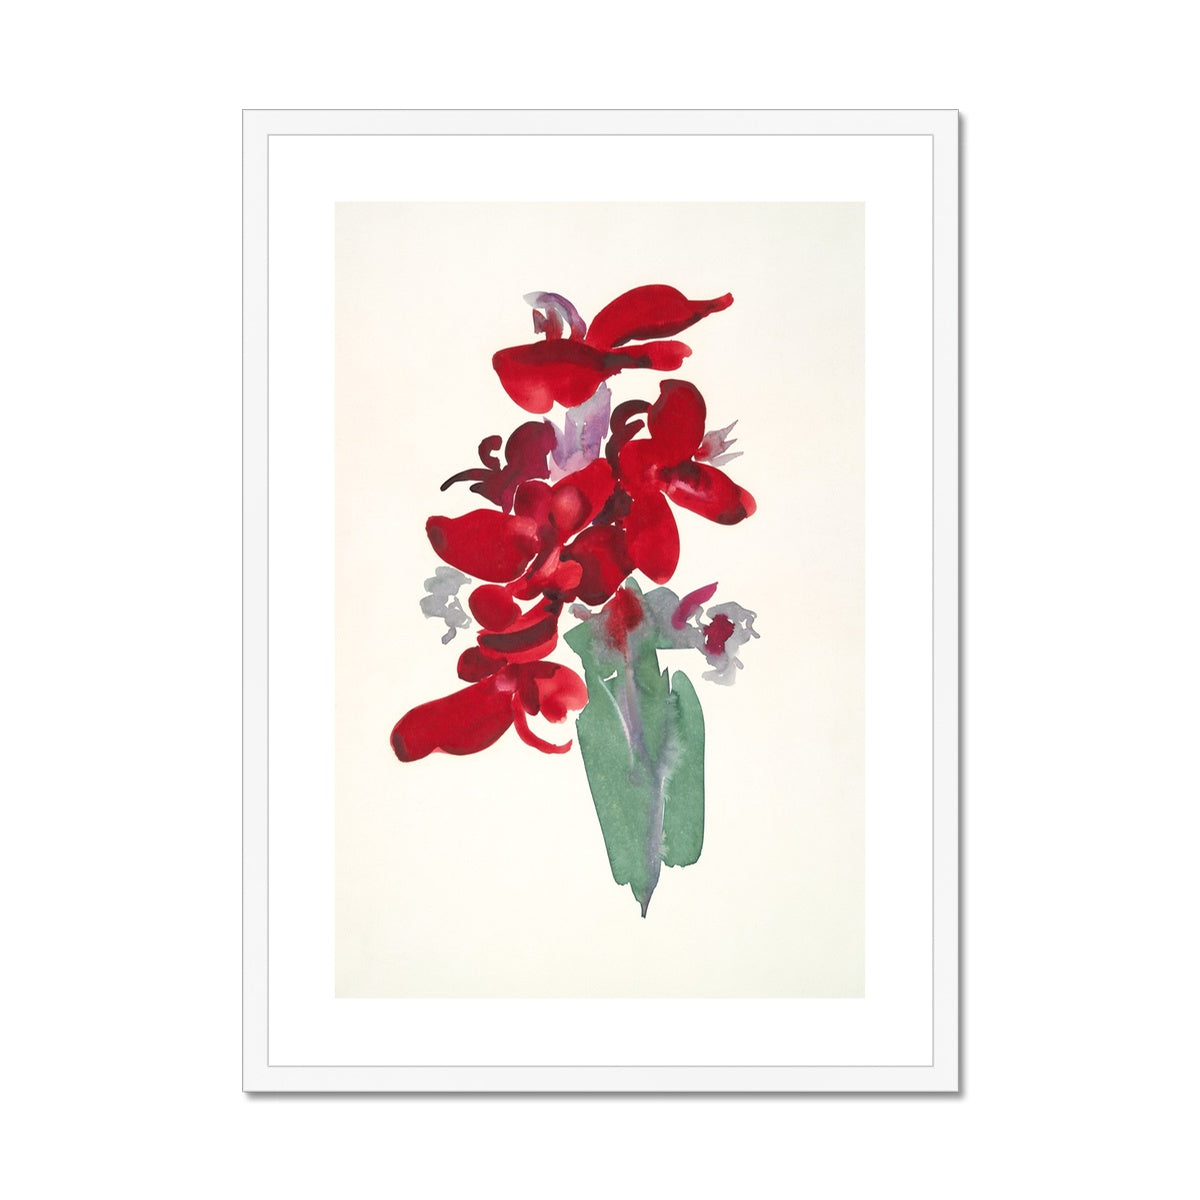 &#39;Red Canna&#39;  by Georgia O’Keeffe. Open Edition Fine Art Print. Framed Open Edition Fine Art Print. Historic Art